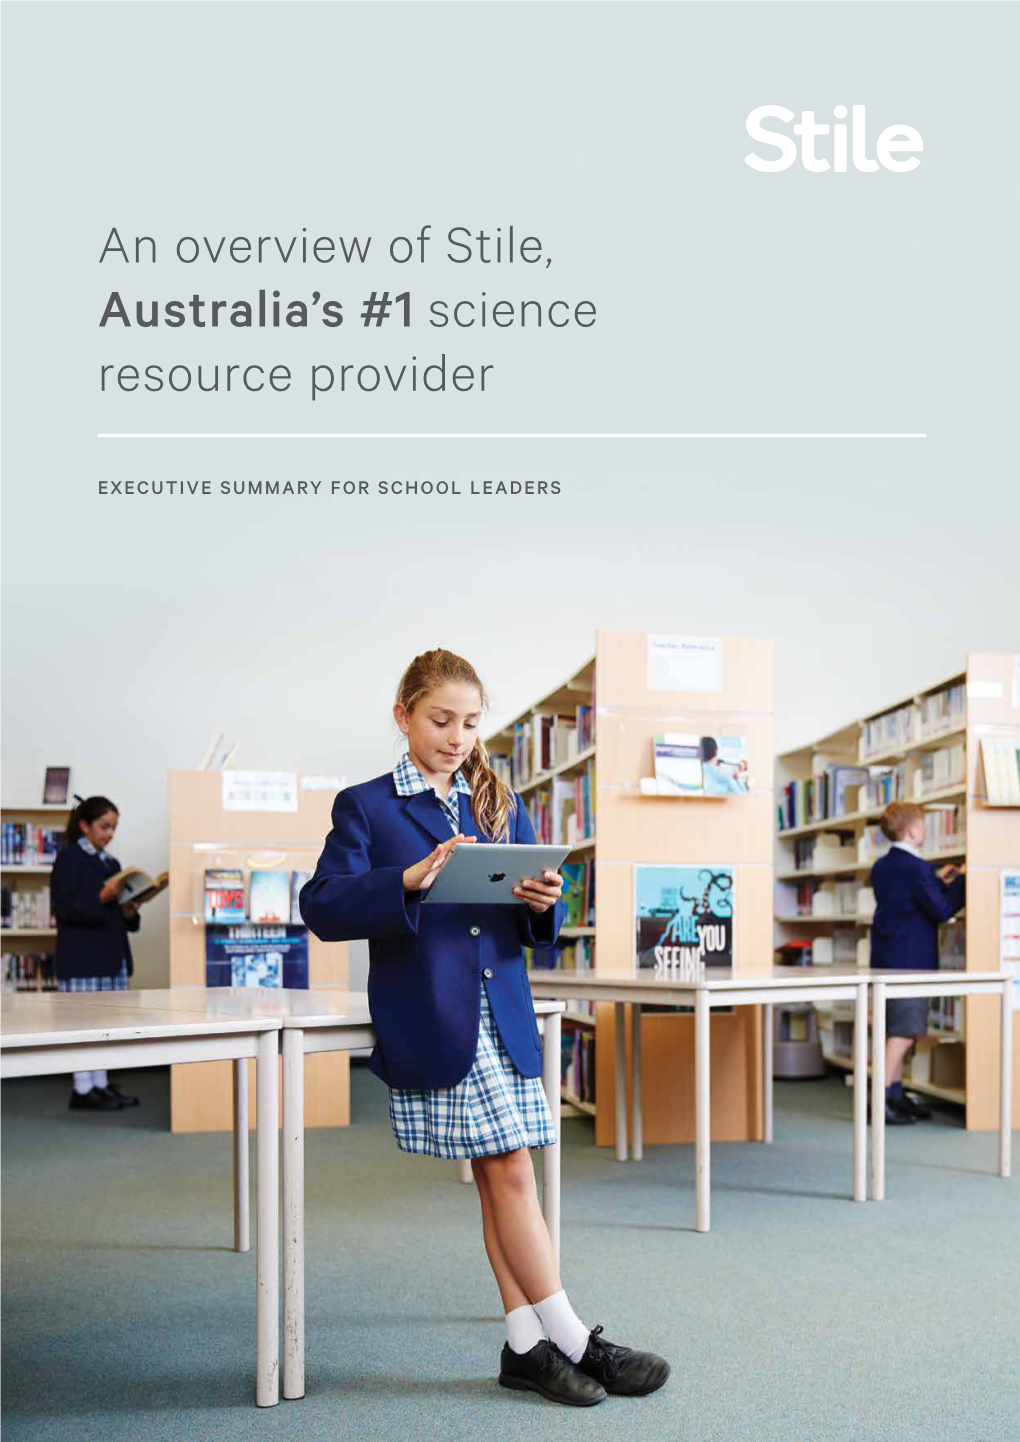 An Overview of Stile, Australia's #1 Science Resource Provider